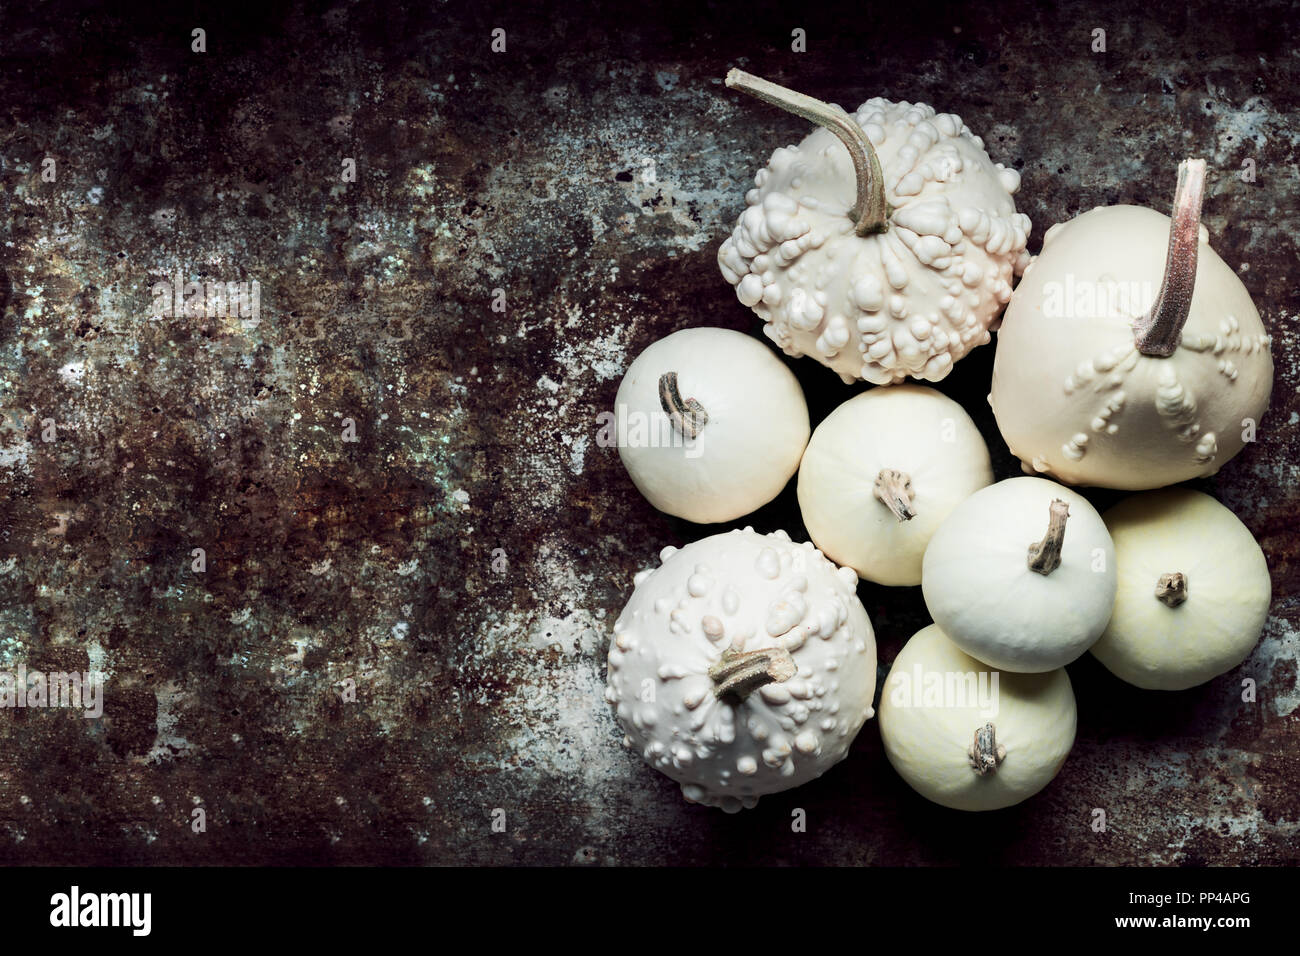 Happy Thanksgiving Background. Little white pumpkins on rustic metal background with copy space. Autumn Harvest and Holiday minimal still life. Stock Photo